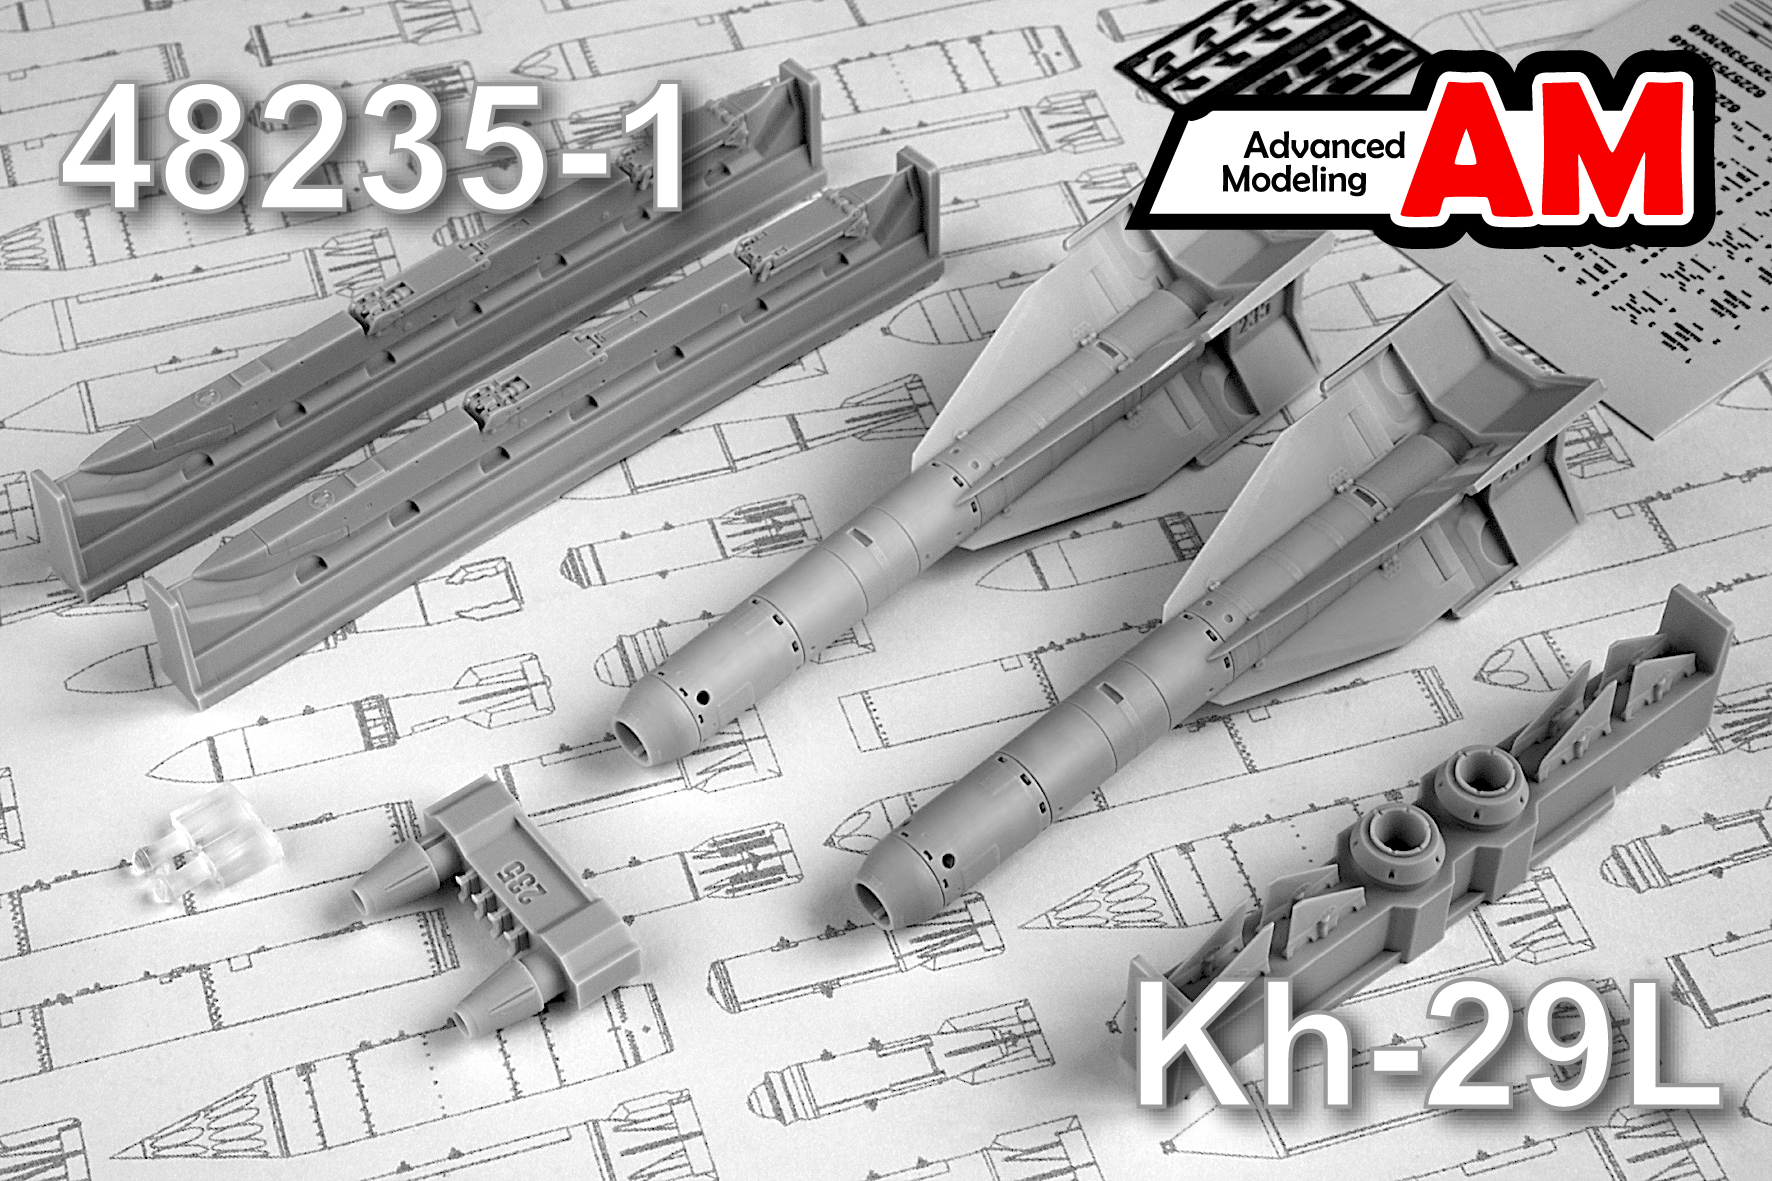 Additions (3D resin printing) 1/48 Aircraft guided missile Kh-29L with launcher AKU-58-1 (Advanced Modeling) 